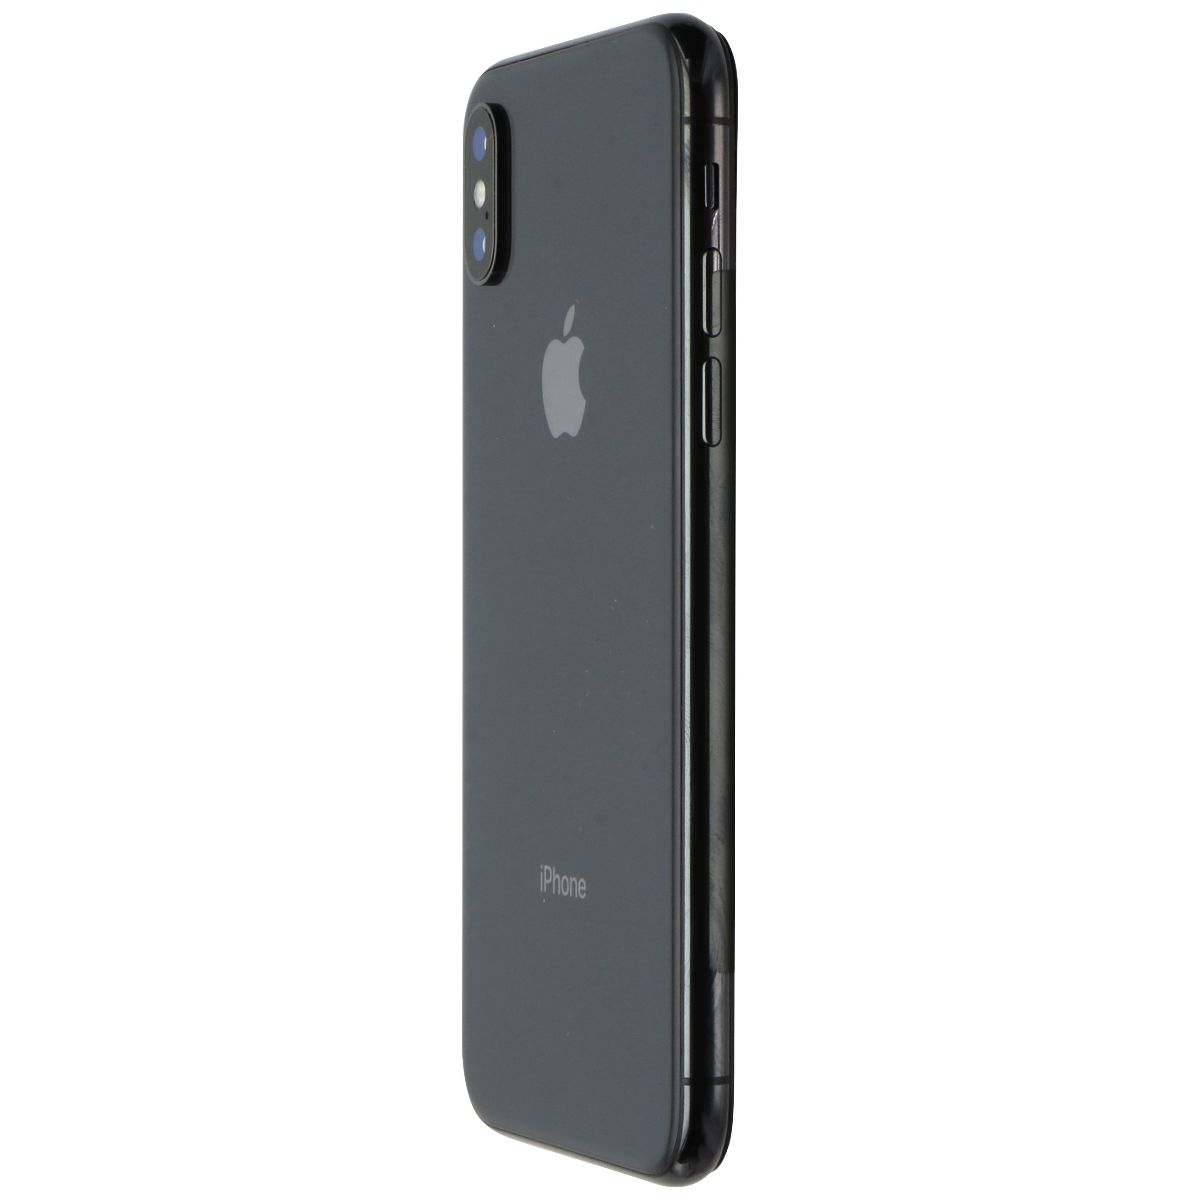 Apple iPhone X (5.8-inch) (A1901) Unlocked - 256GB / Space Gray - Bad Face ID* Cell Phones & Smartphones Apple    - Simple Cell Bulk Wholesale Pricing - USA Seller